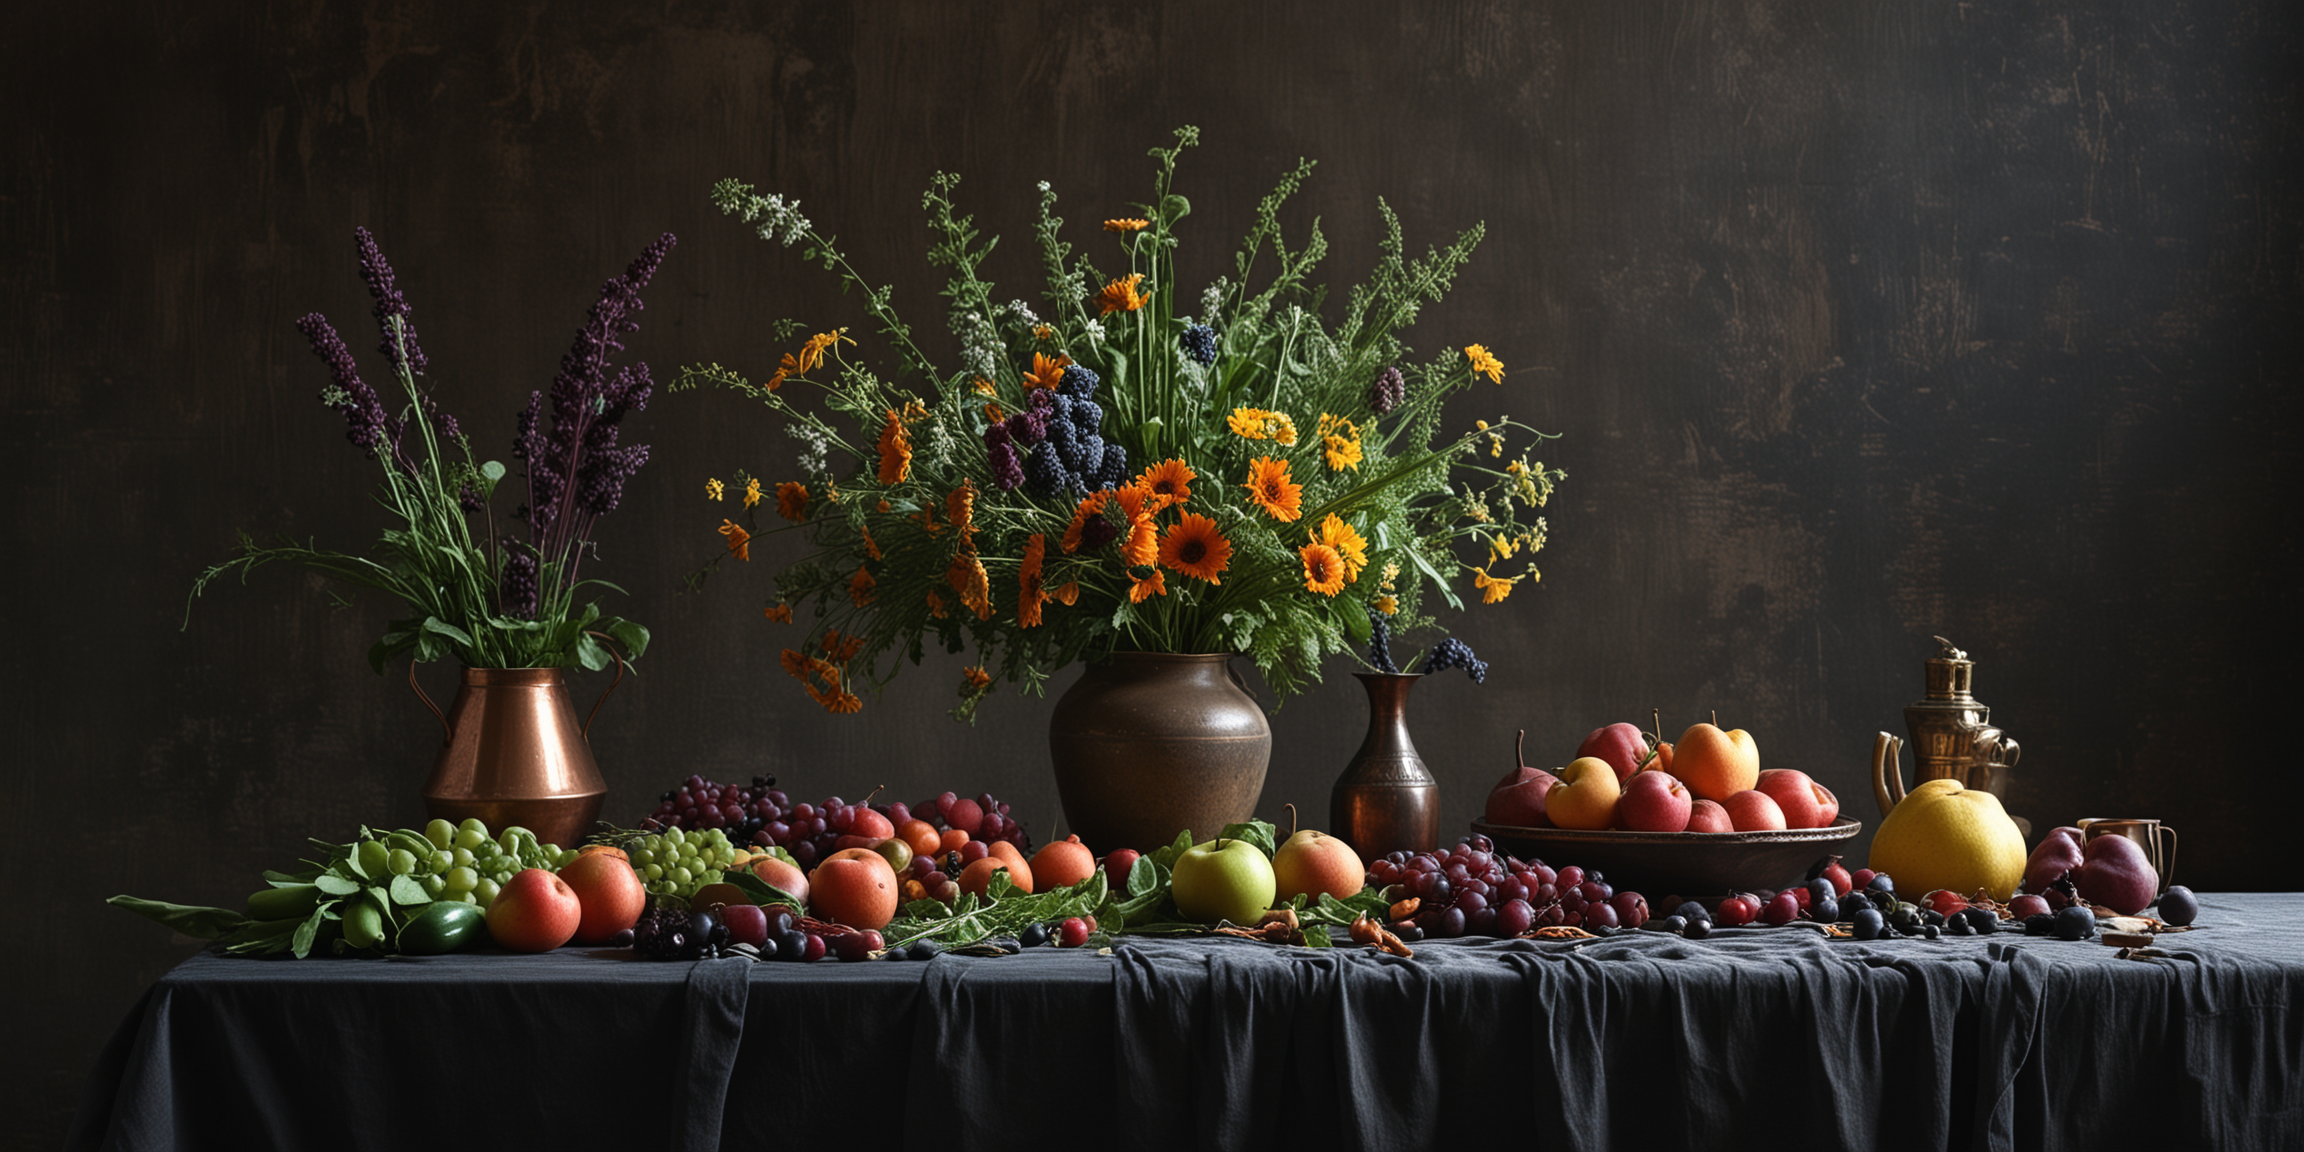 Rustic Still Life with Flowers Fruits and Vegetables on Antique Table